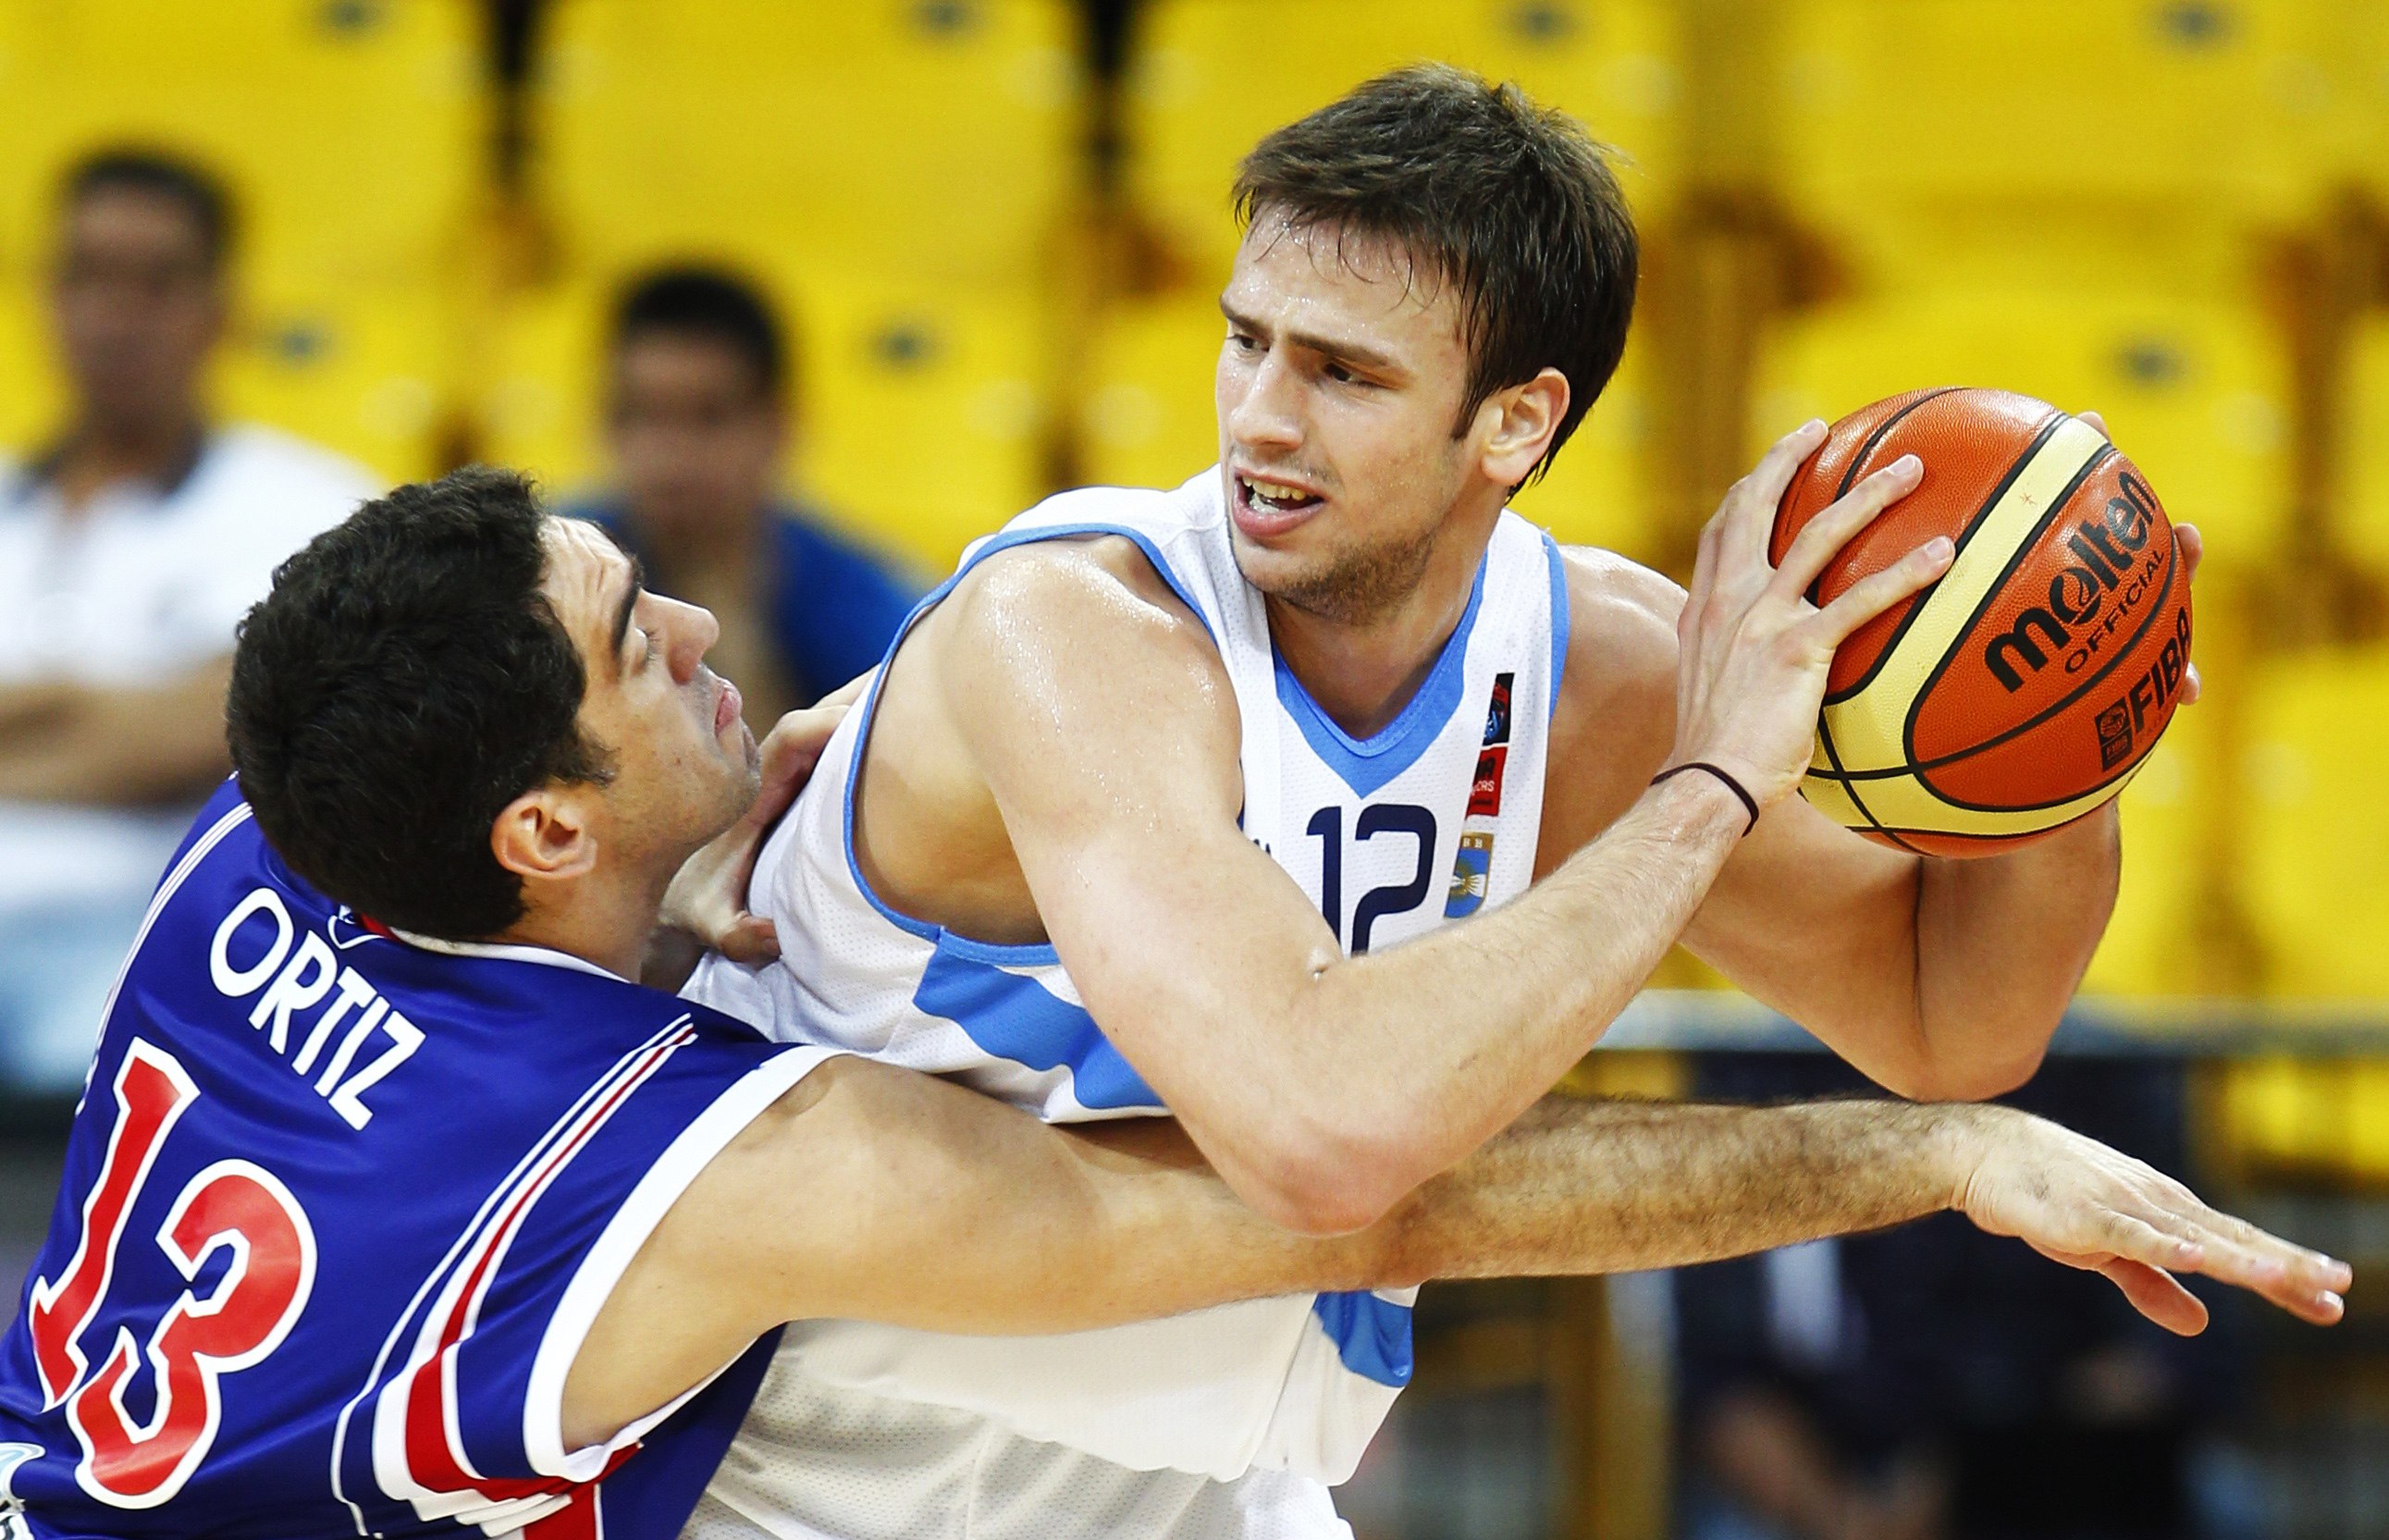 Argentina's Delia goes for a basket against Paraguay's Ortiz at the FIBA Americas Championship basketball game in Caracas